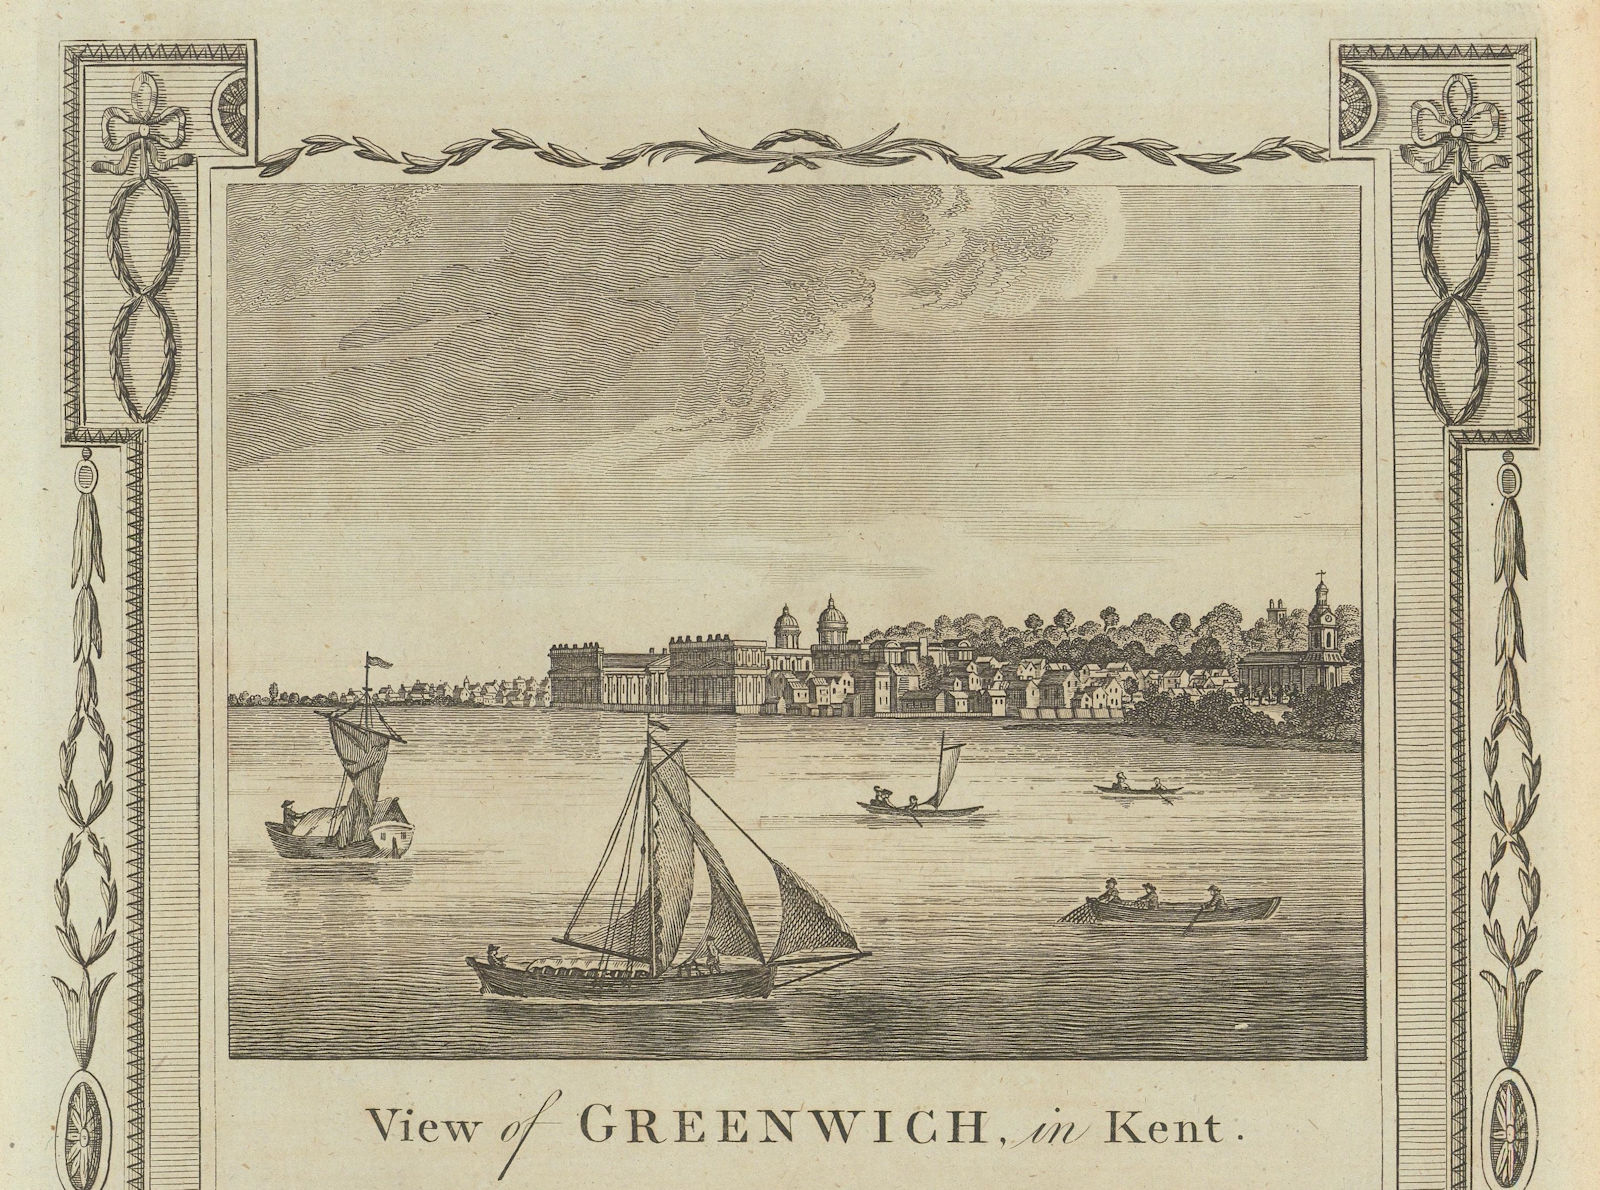 A view of Greenwich from Deptford, London. Royal Naval College. THORNTON 1784